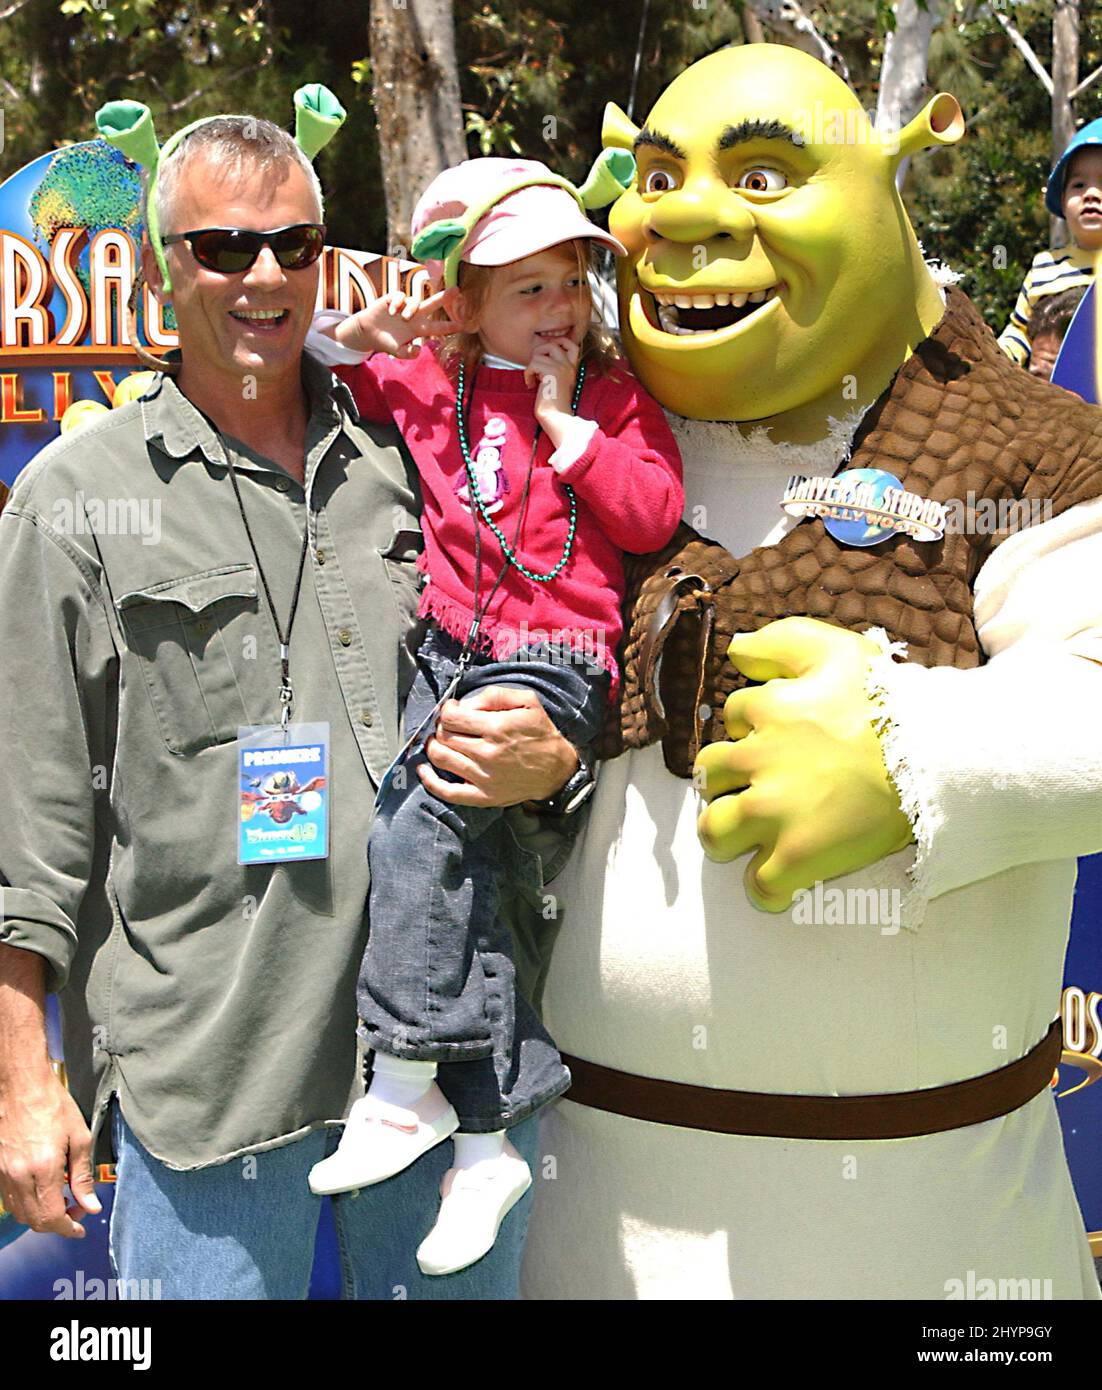 RICHARD DEAN ANDERSON & DAUGHTER WYLIE ATTEND THE SHREK 4-D RIDE OPENING AT UNIVERSAL STUDIOS, CALIFORNIA PICTURE: UK PRESS Stock Photo